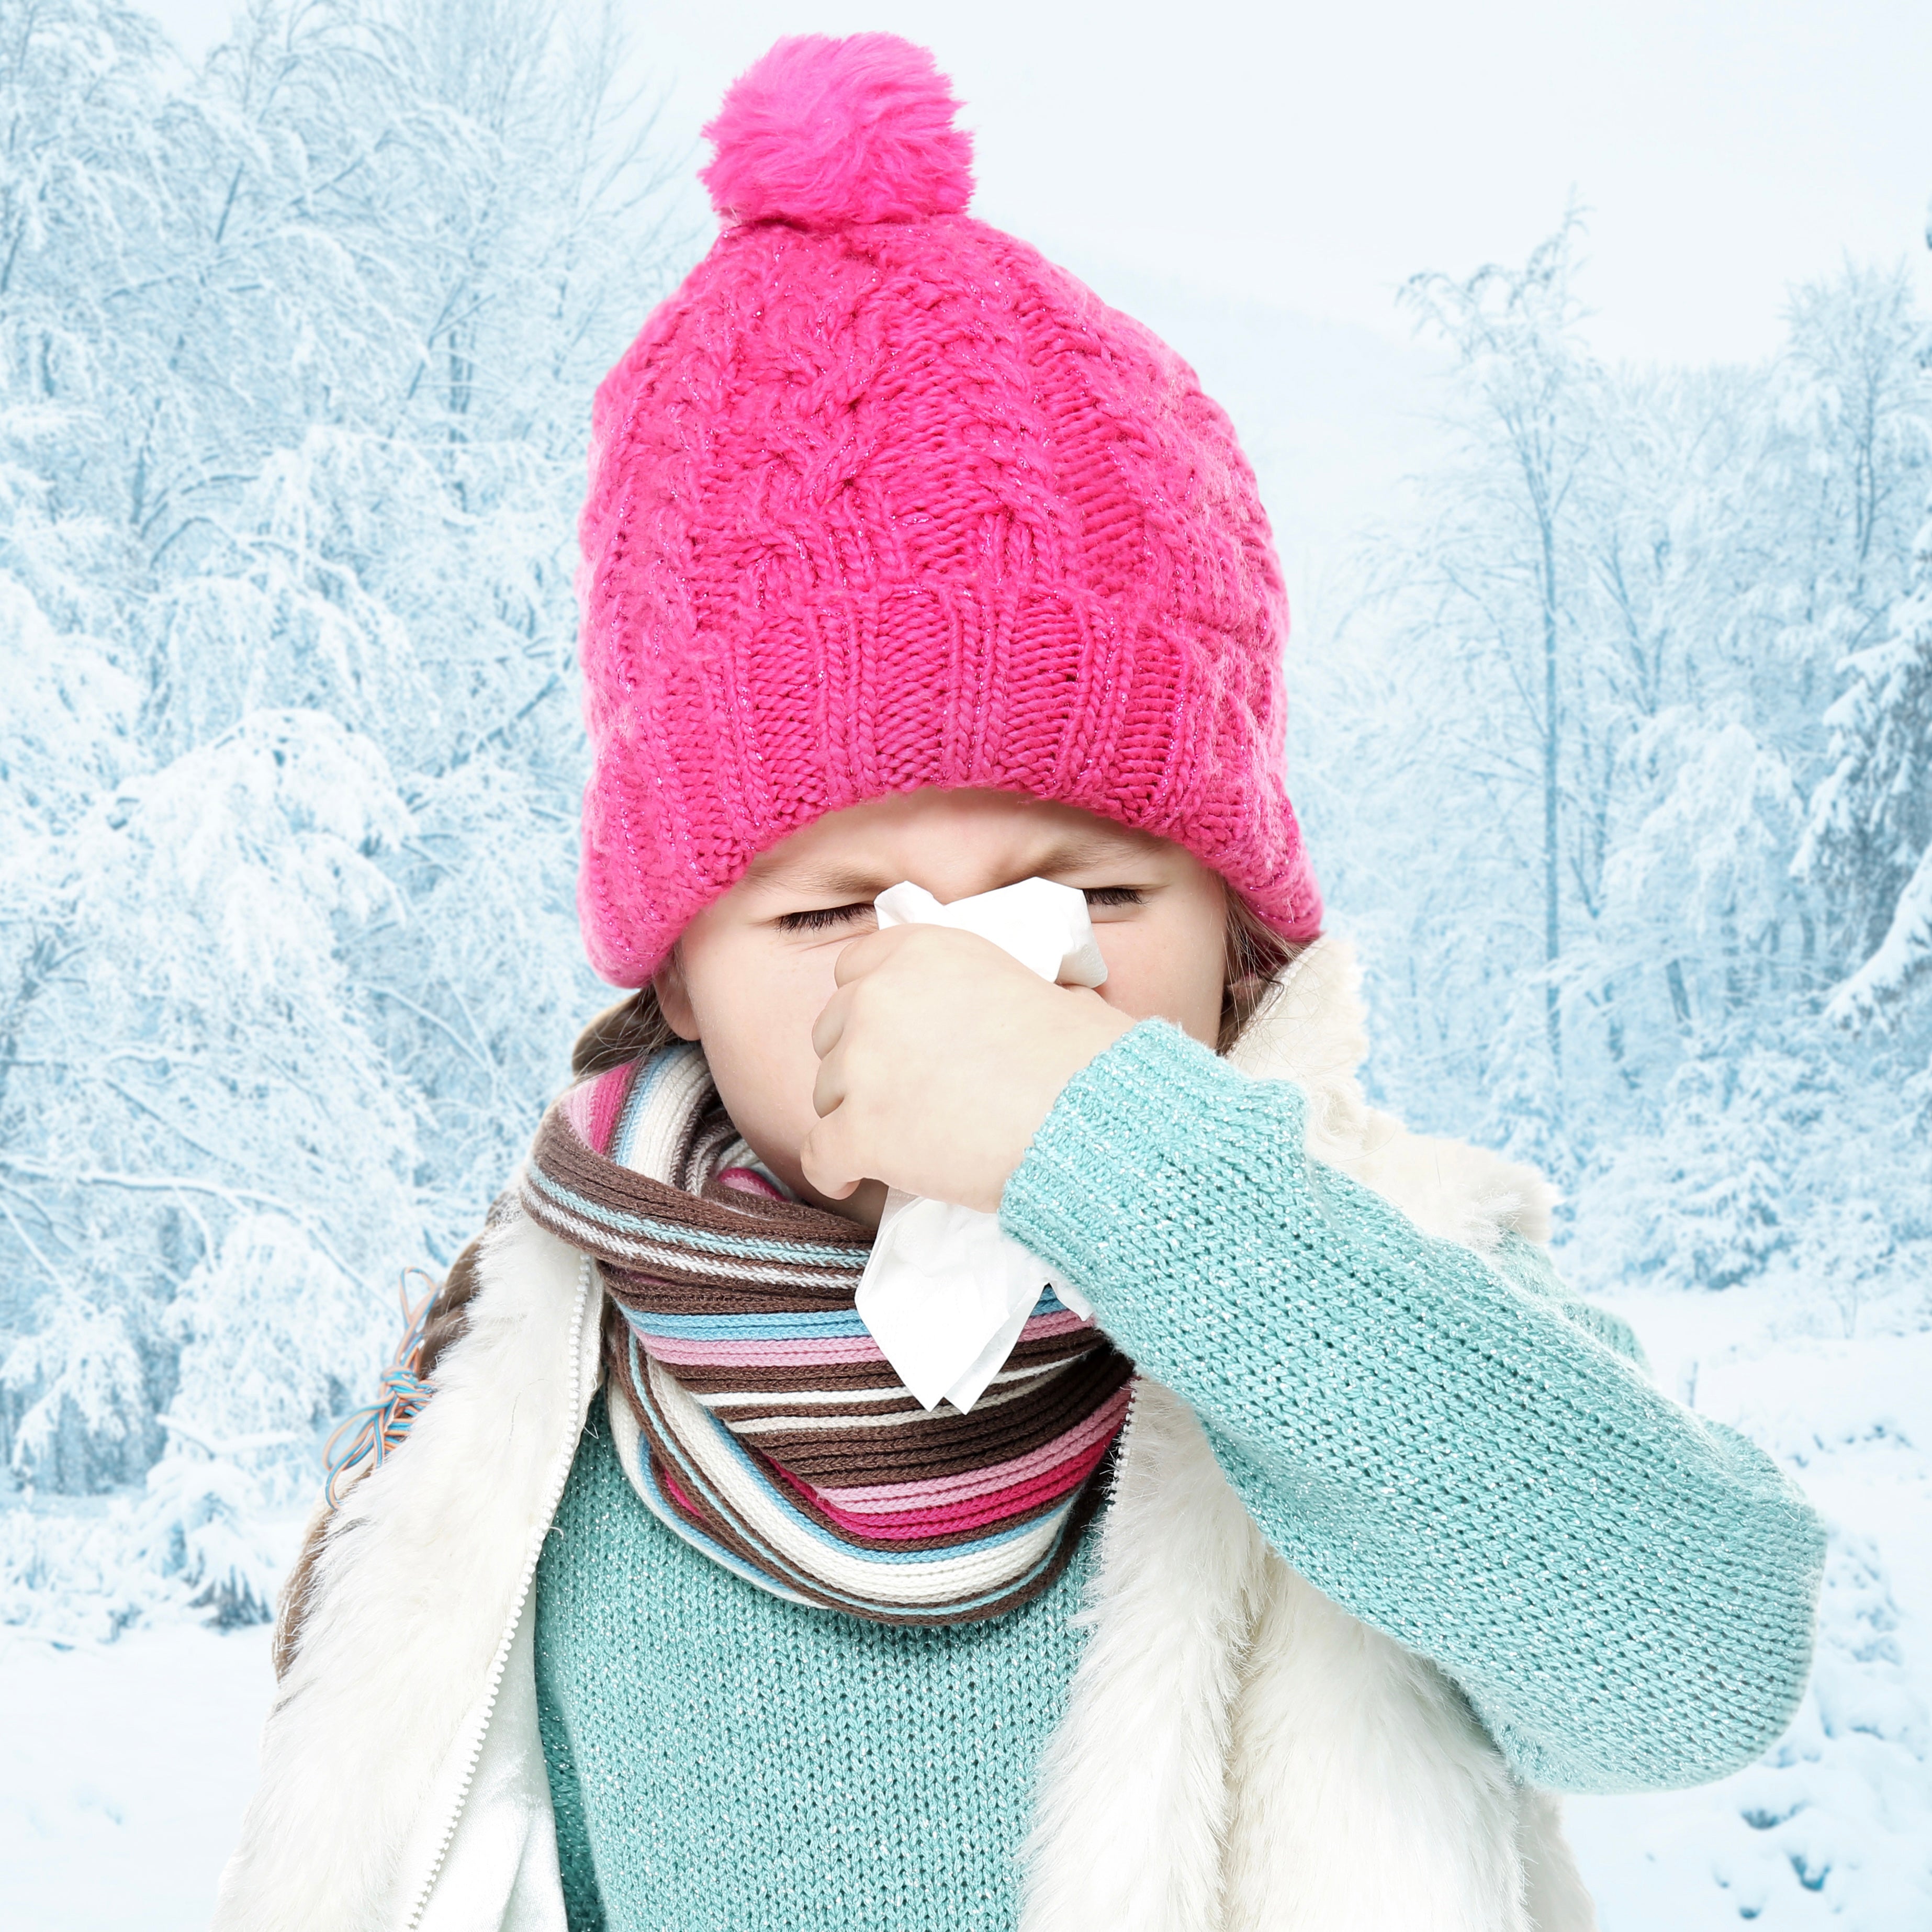 Tips on how to help your baba stay snuffle free this winter